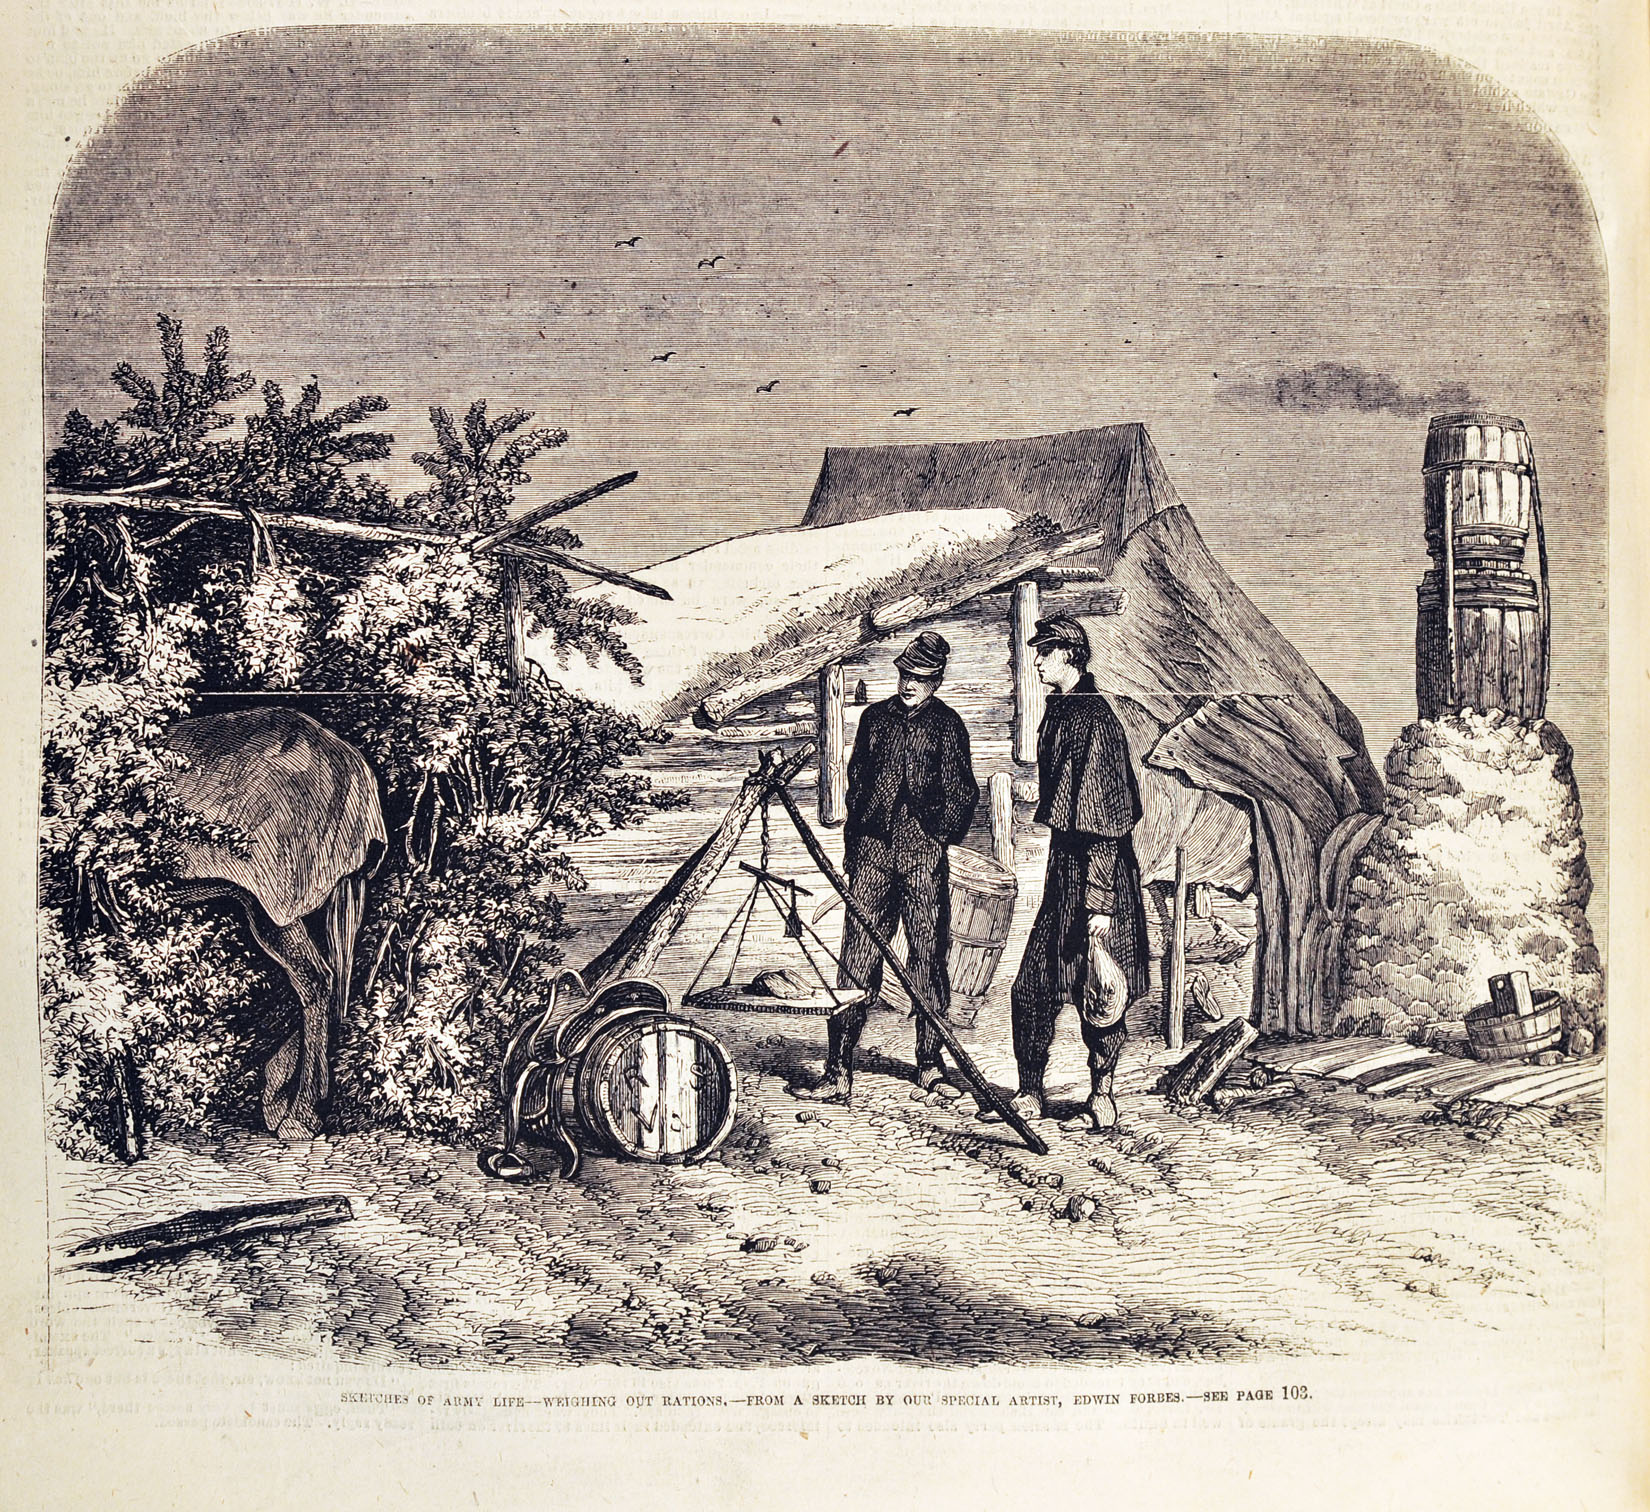 Edwin Forbes, Weighing Out Rations, engraving from a field sketch, Frank Leslie's Illustrated Newspaper, No. 449 Vol. 18, May 7, 1864, p. 100 (Chicago Public Library)